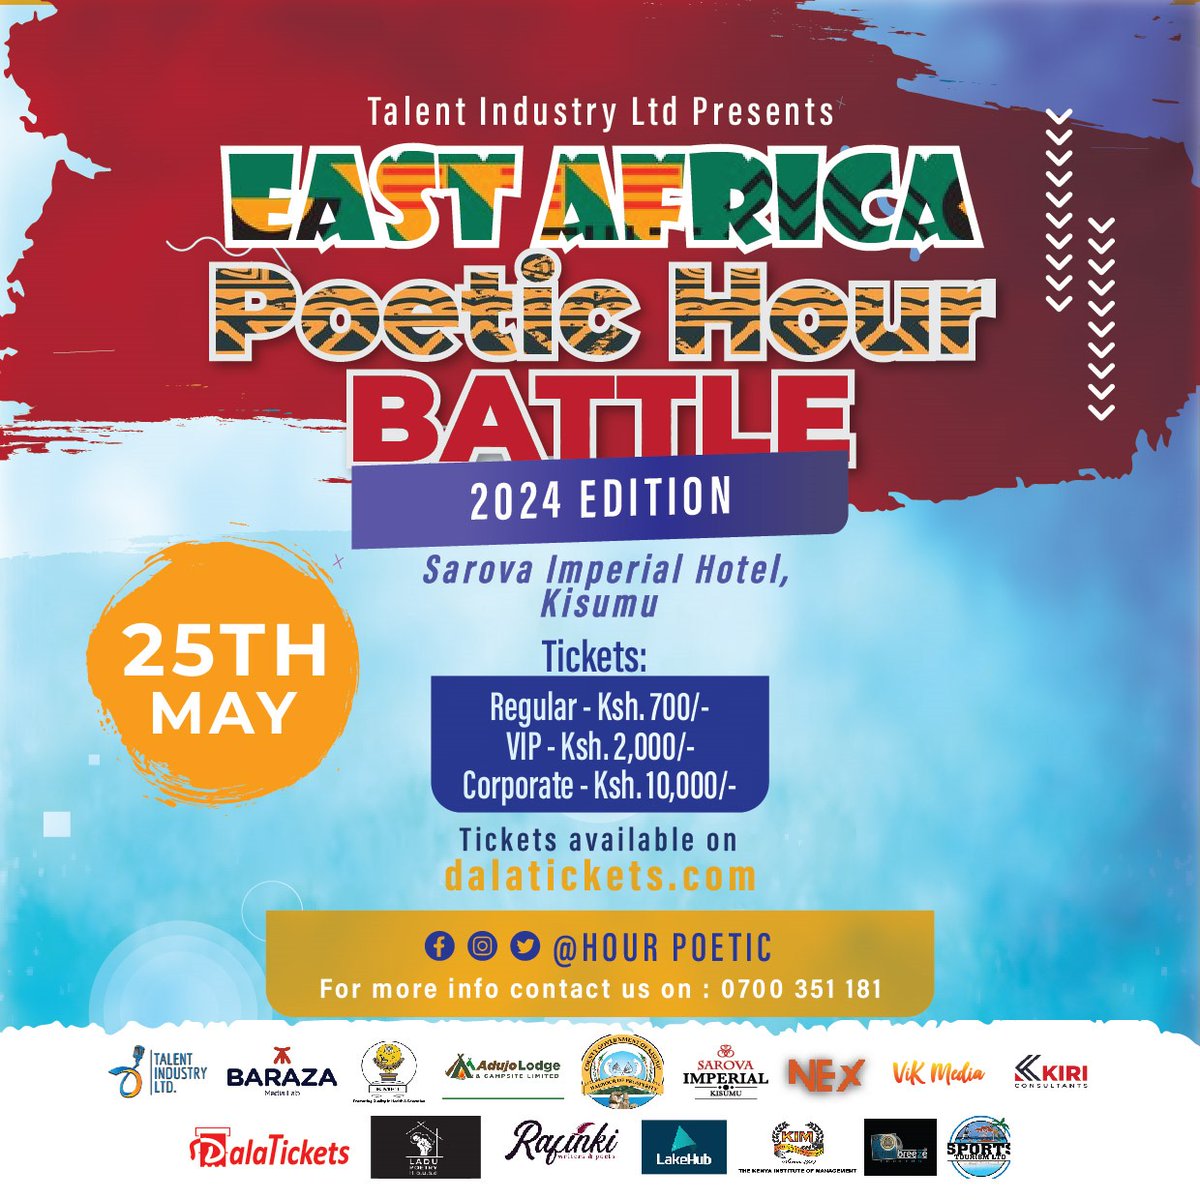 The East Africa Poetic Hour Battle is a premier cultural event that celebrates poetry, creativity, and cultural diversity across East Africa.